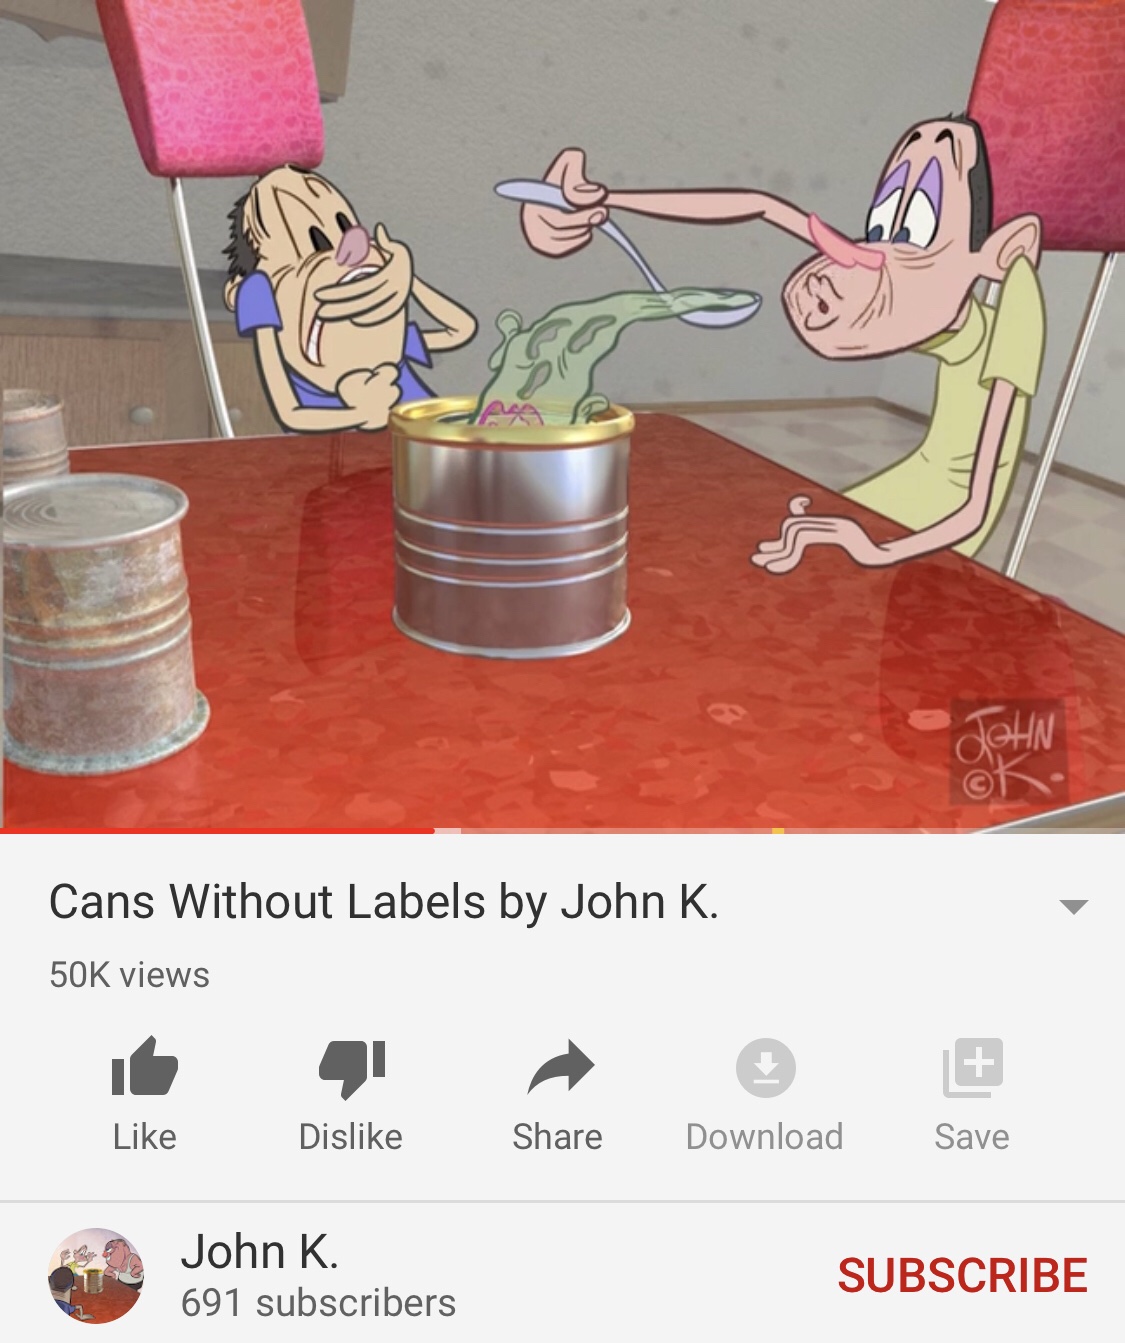 Cans Without Labels by John K. is an animated dark comedy which features characters eating a face and strong language (YouTube - <a href="https://www.youtube.com/watch?v=xSZqX5Io6AY">Cans Without Labels by John K.</a>)